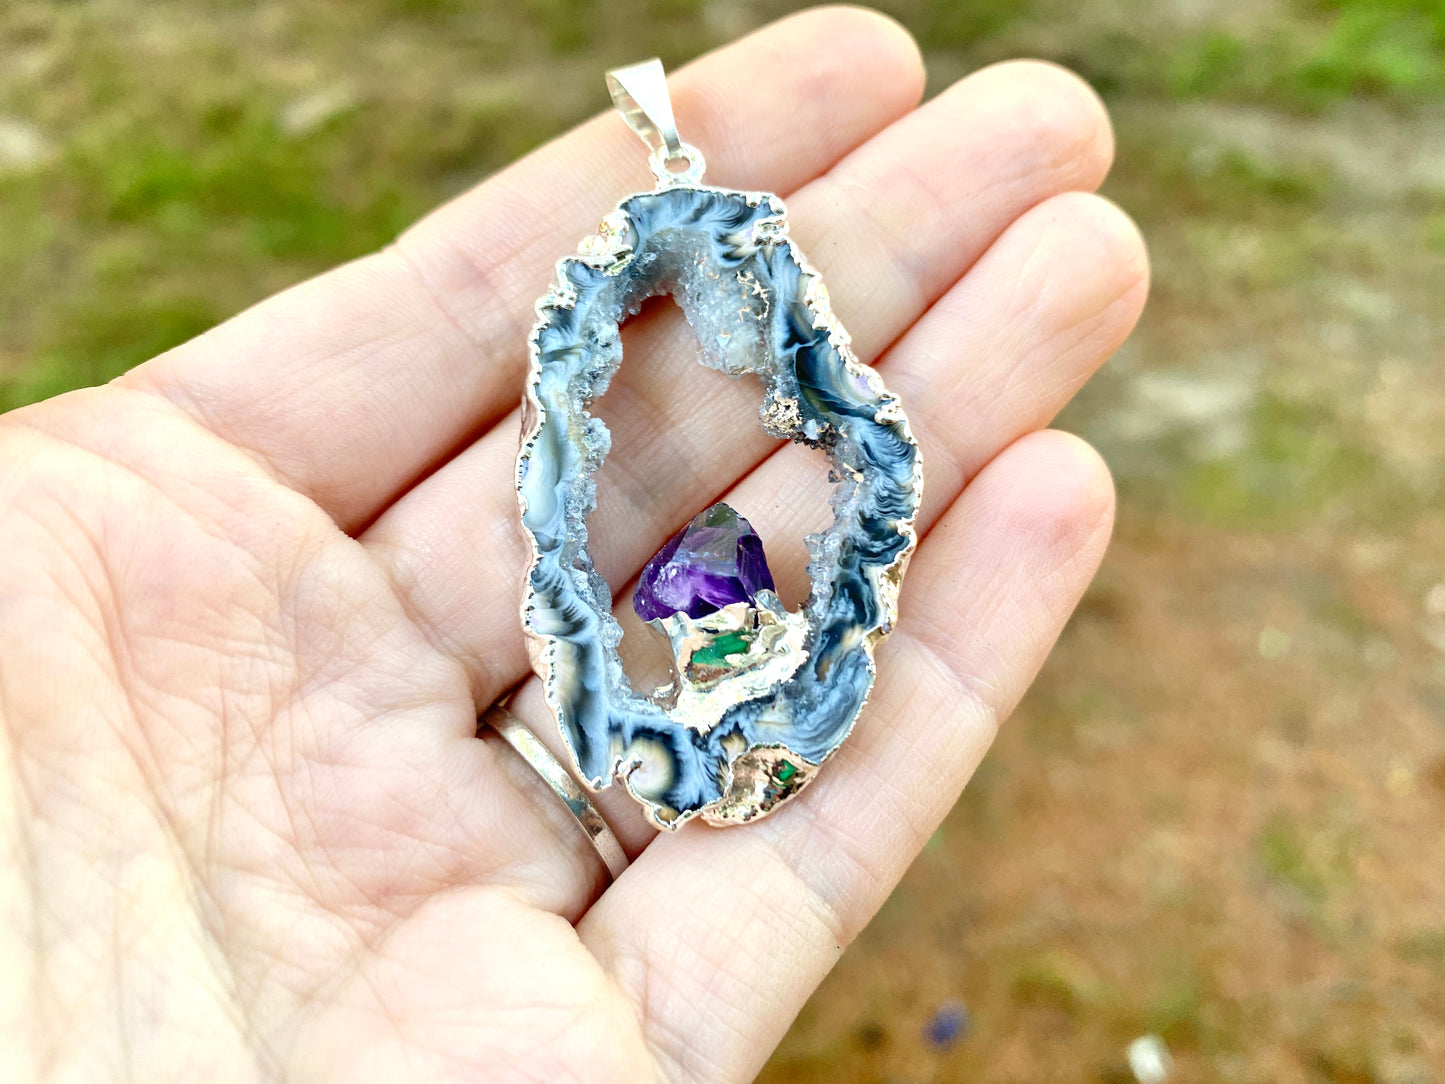 Oco Agate Geode Pendant with Amethyst - Sterling Silver